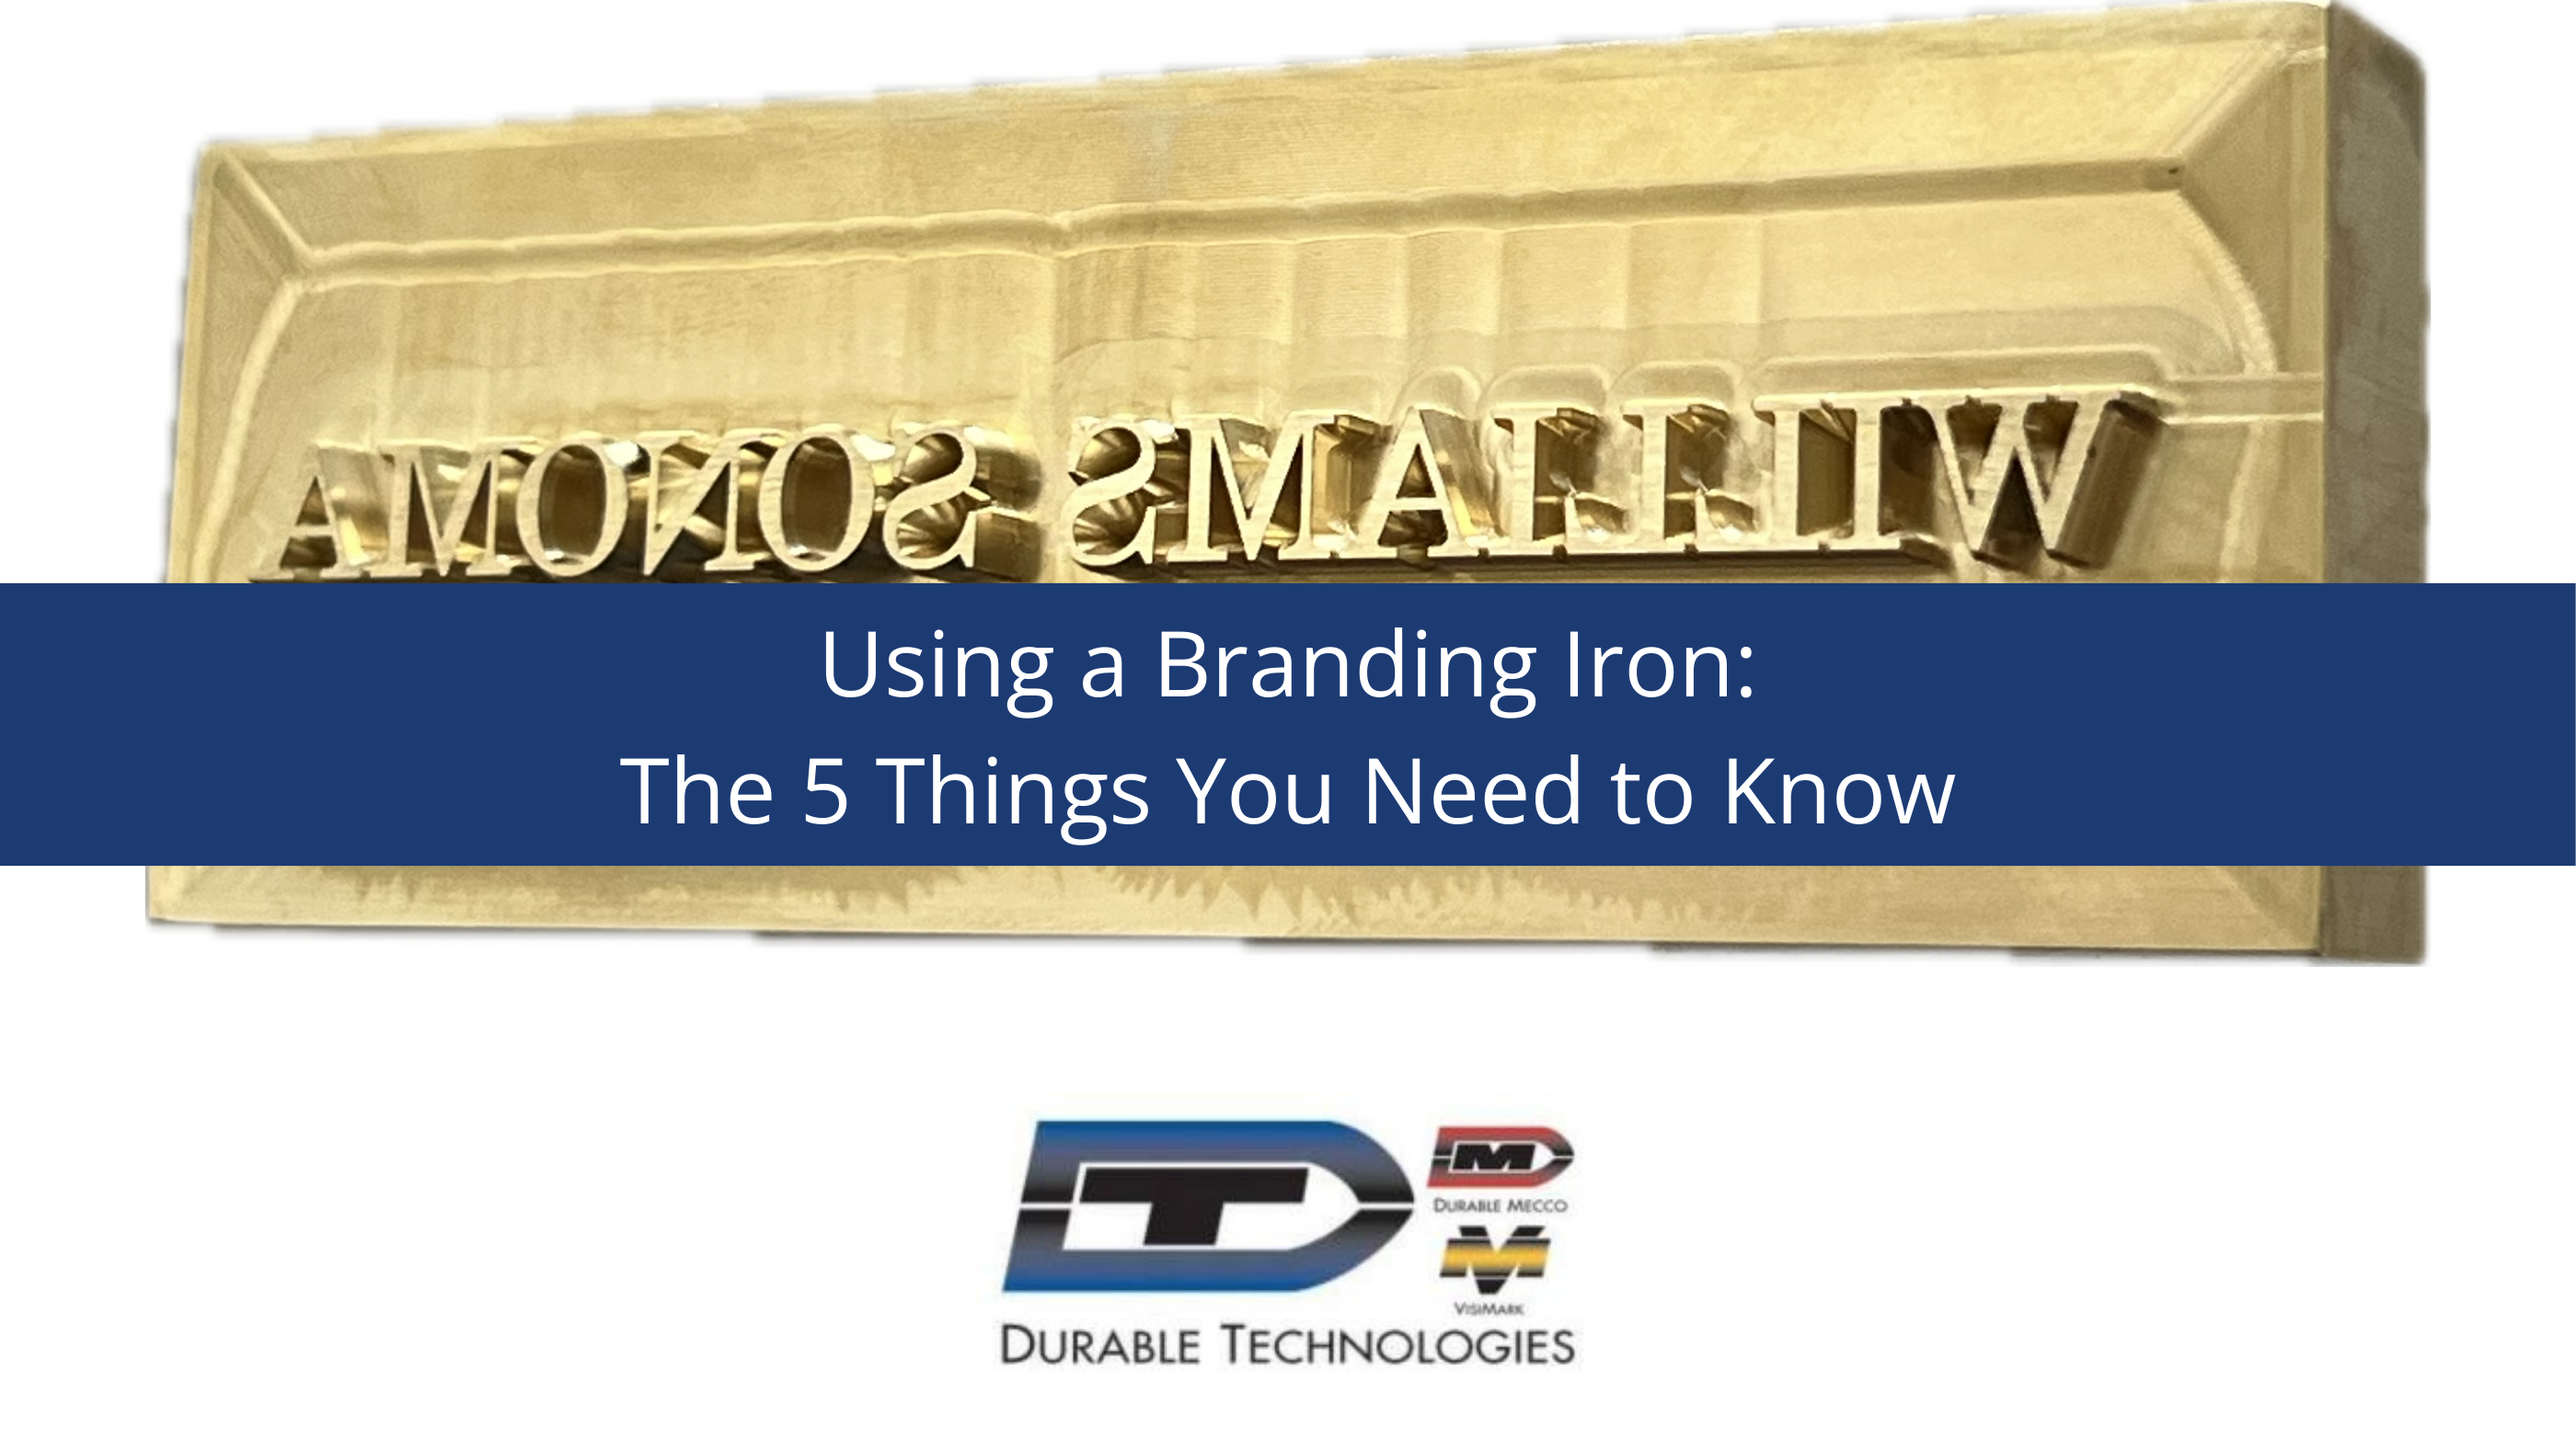 Using a Branding Iron: The 5 Things You Need to Know